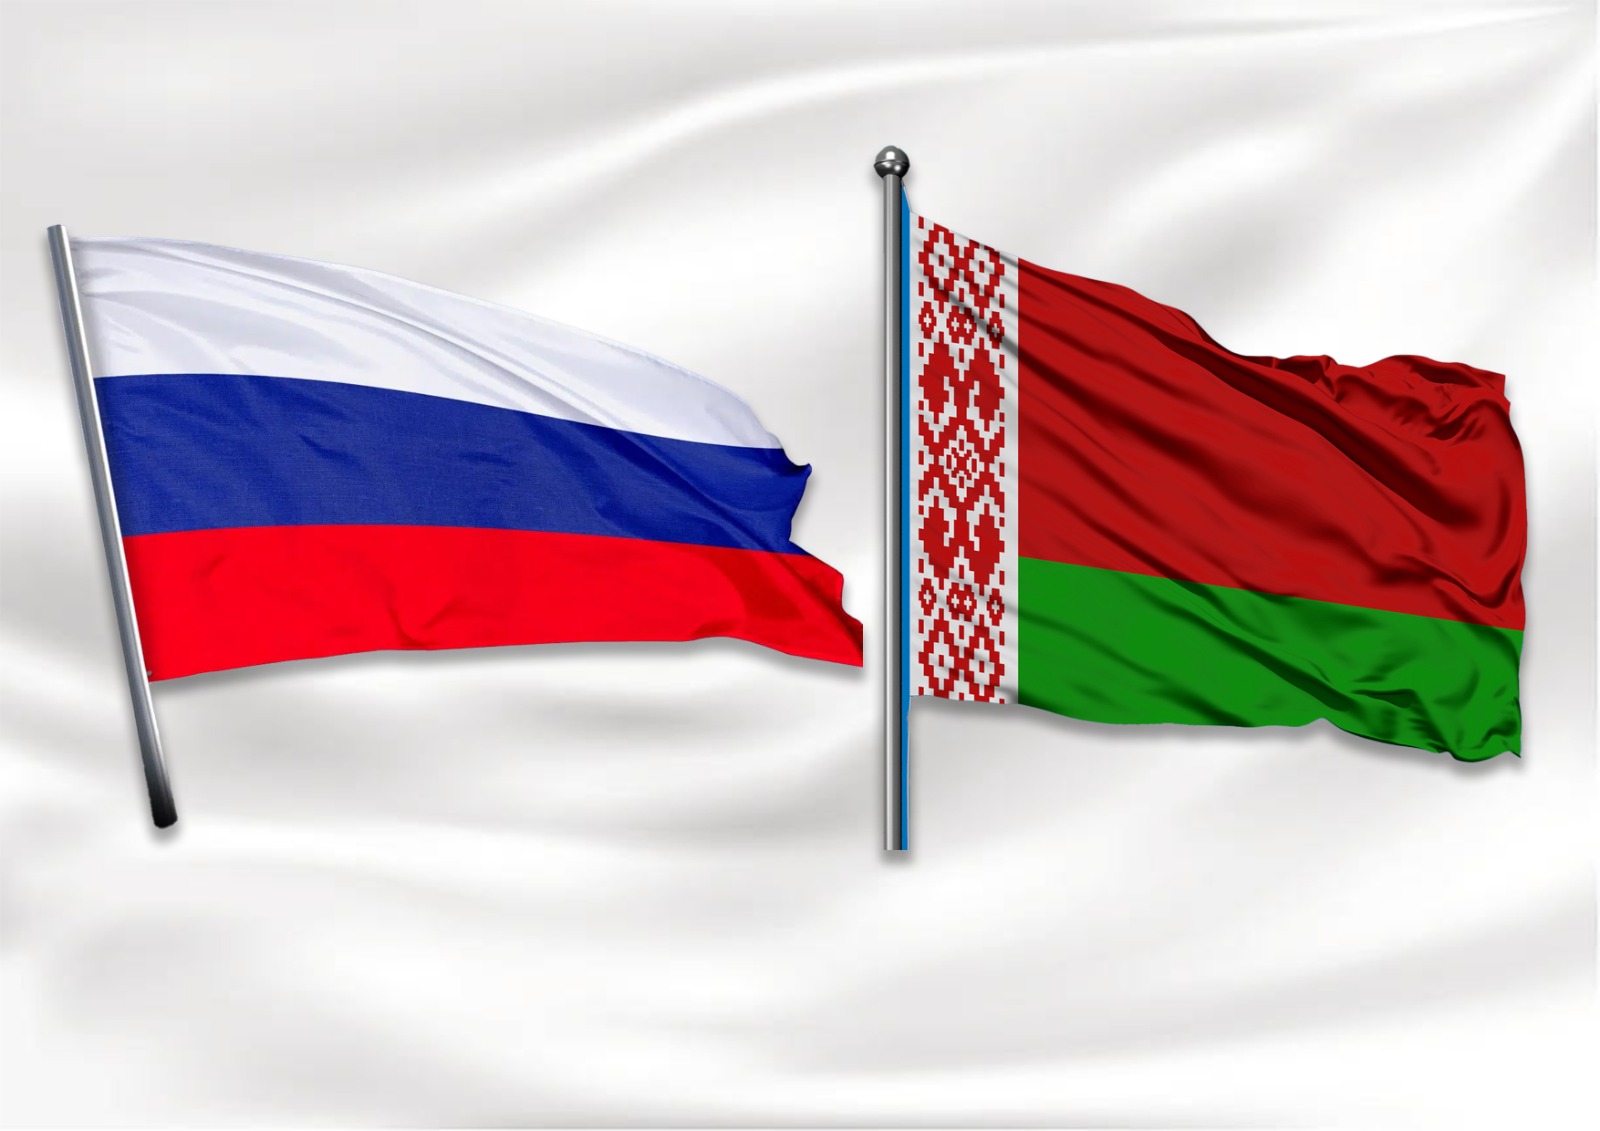 IPC set to discuss Russia and Belarus ban appeals at next meeting in September